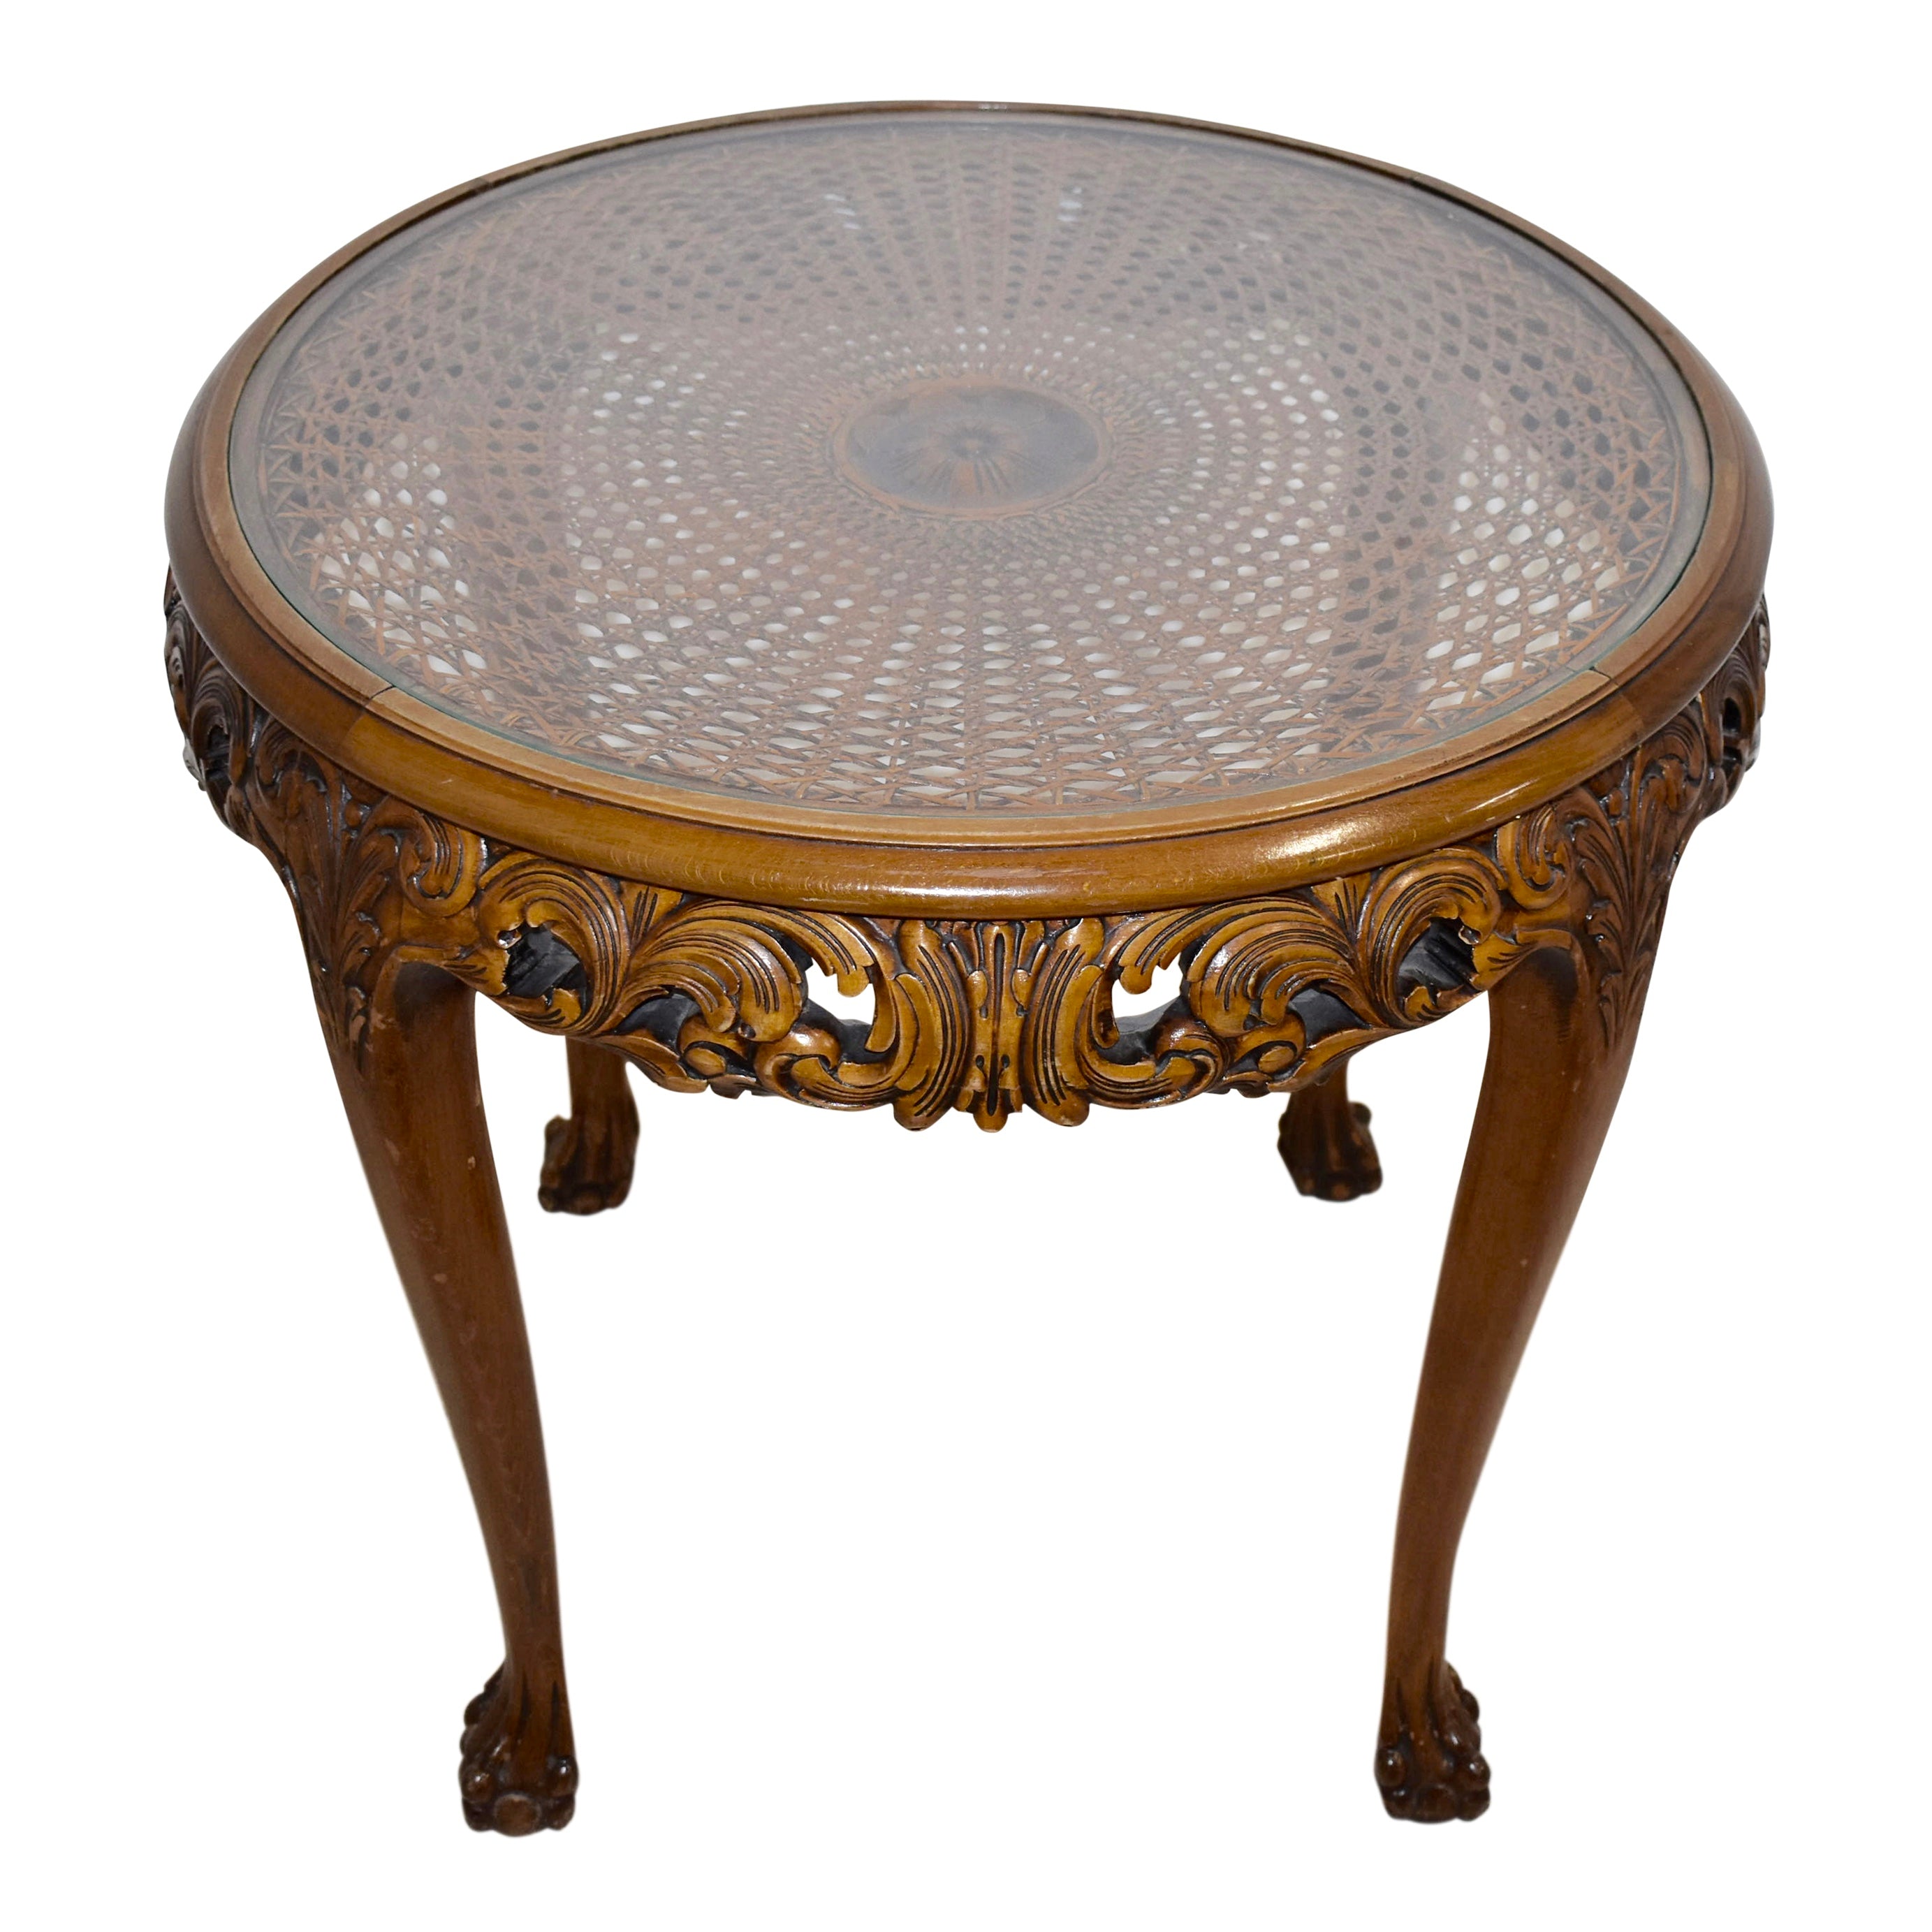 Carved Round Side Table with Cane and Glass Top